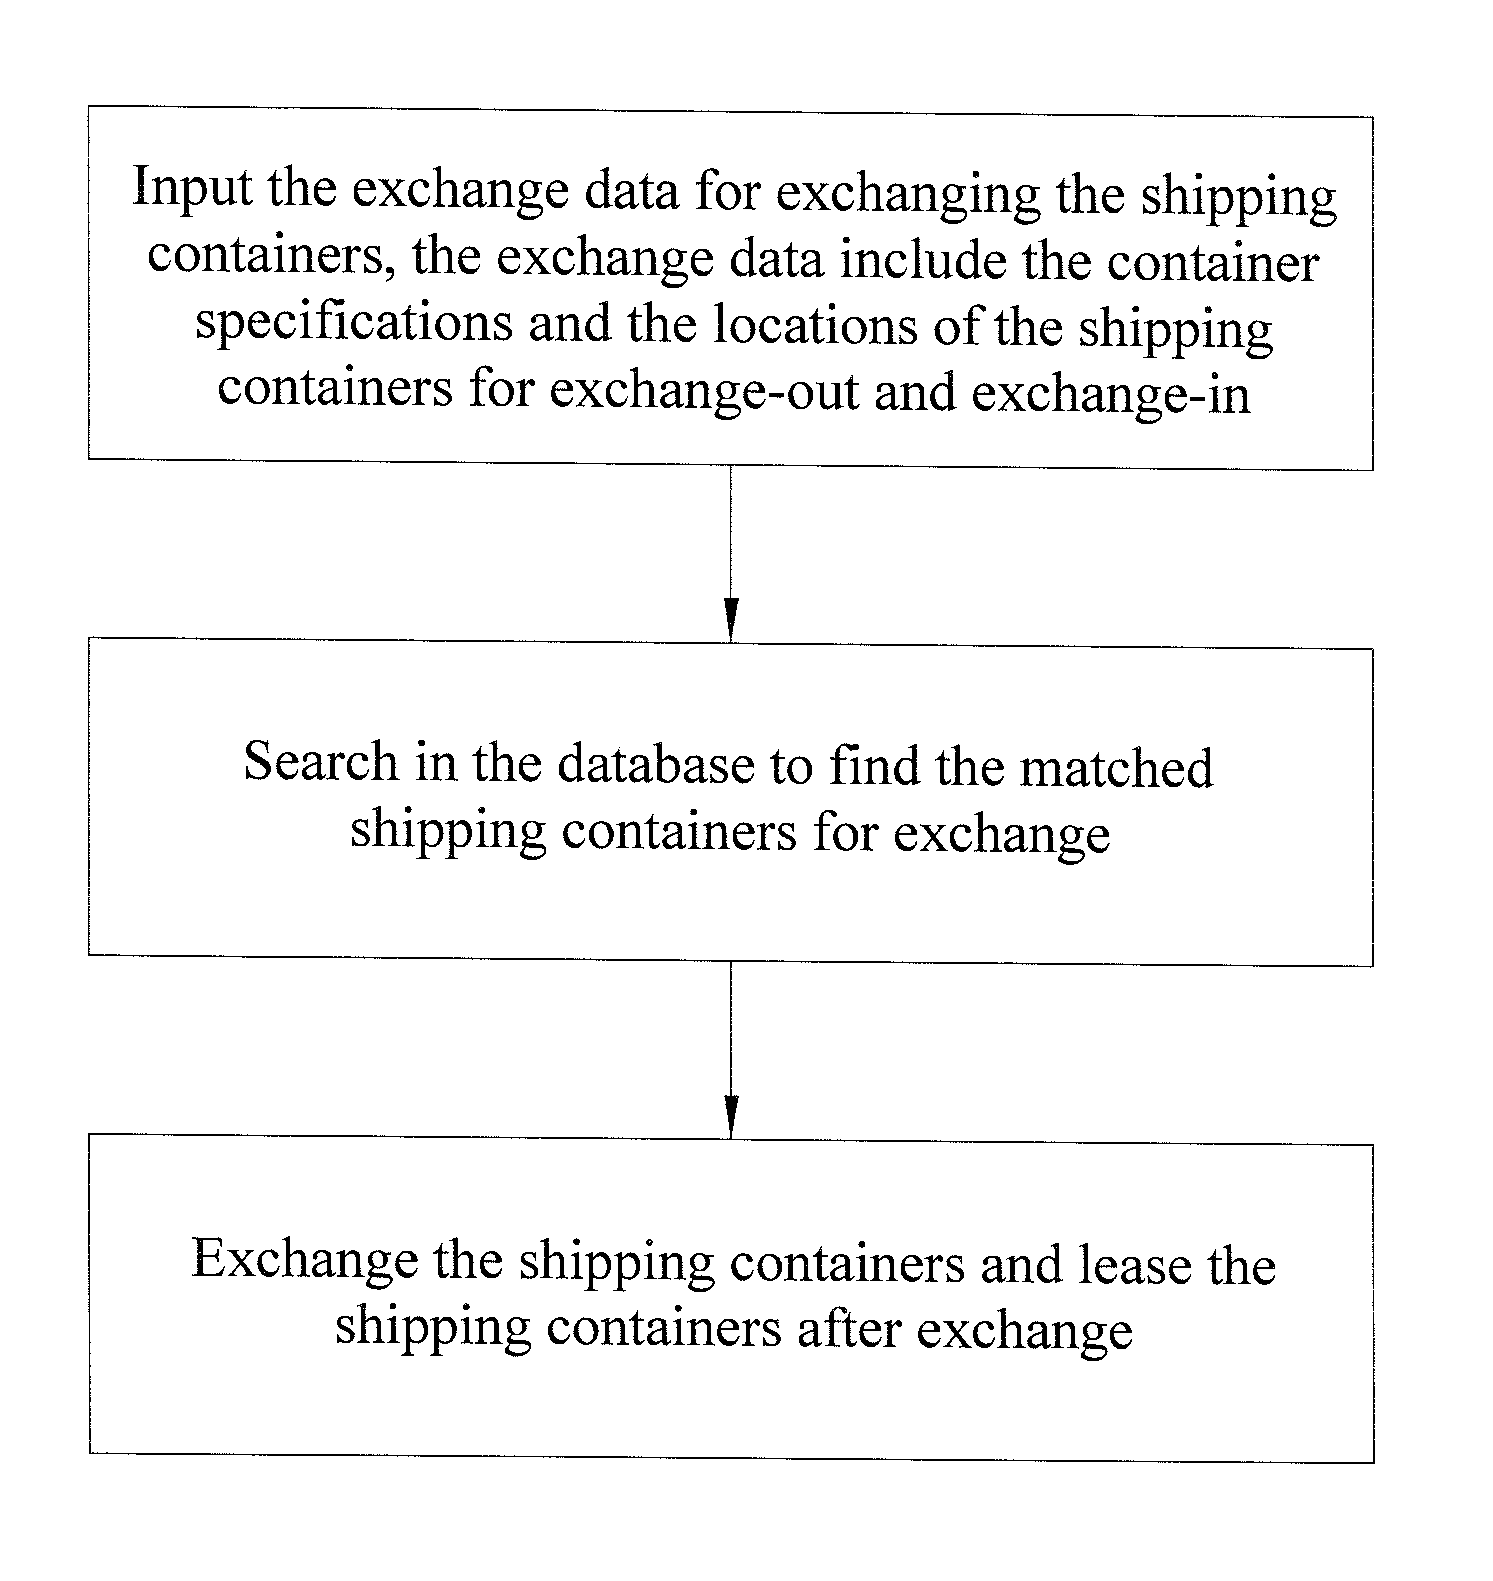 Leasing method for lessees to exchange their shipping containers